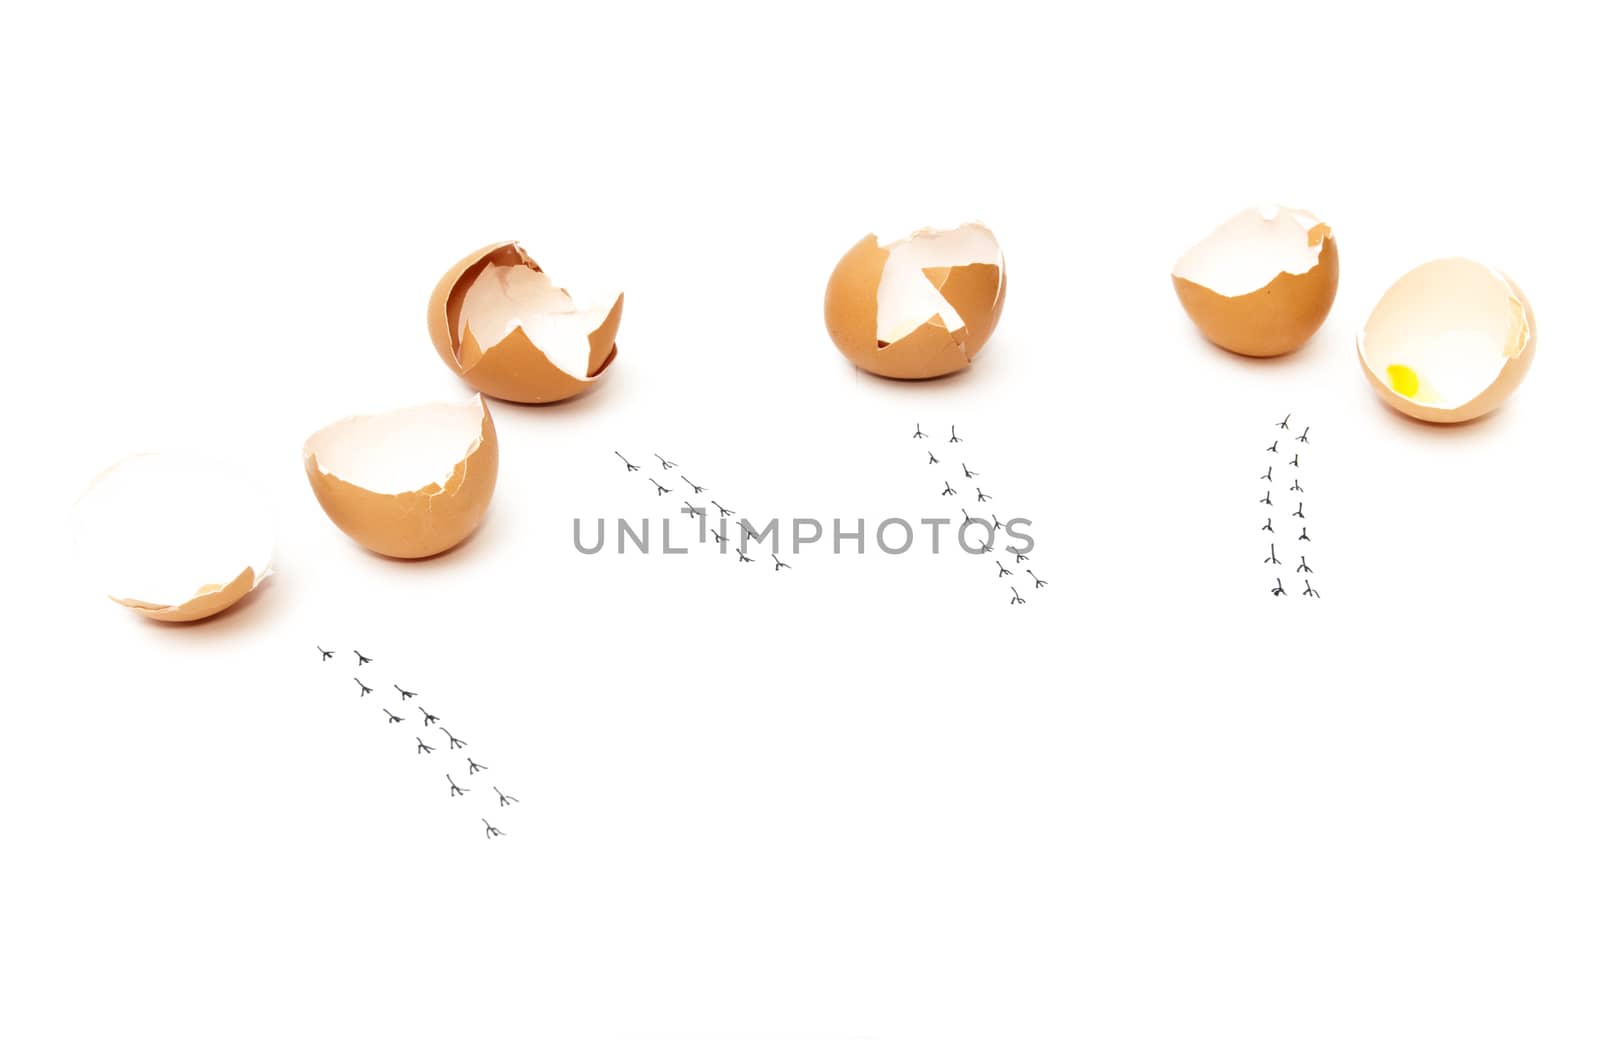 scrambled eggs with footprints on a white background